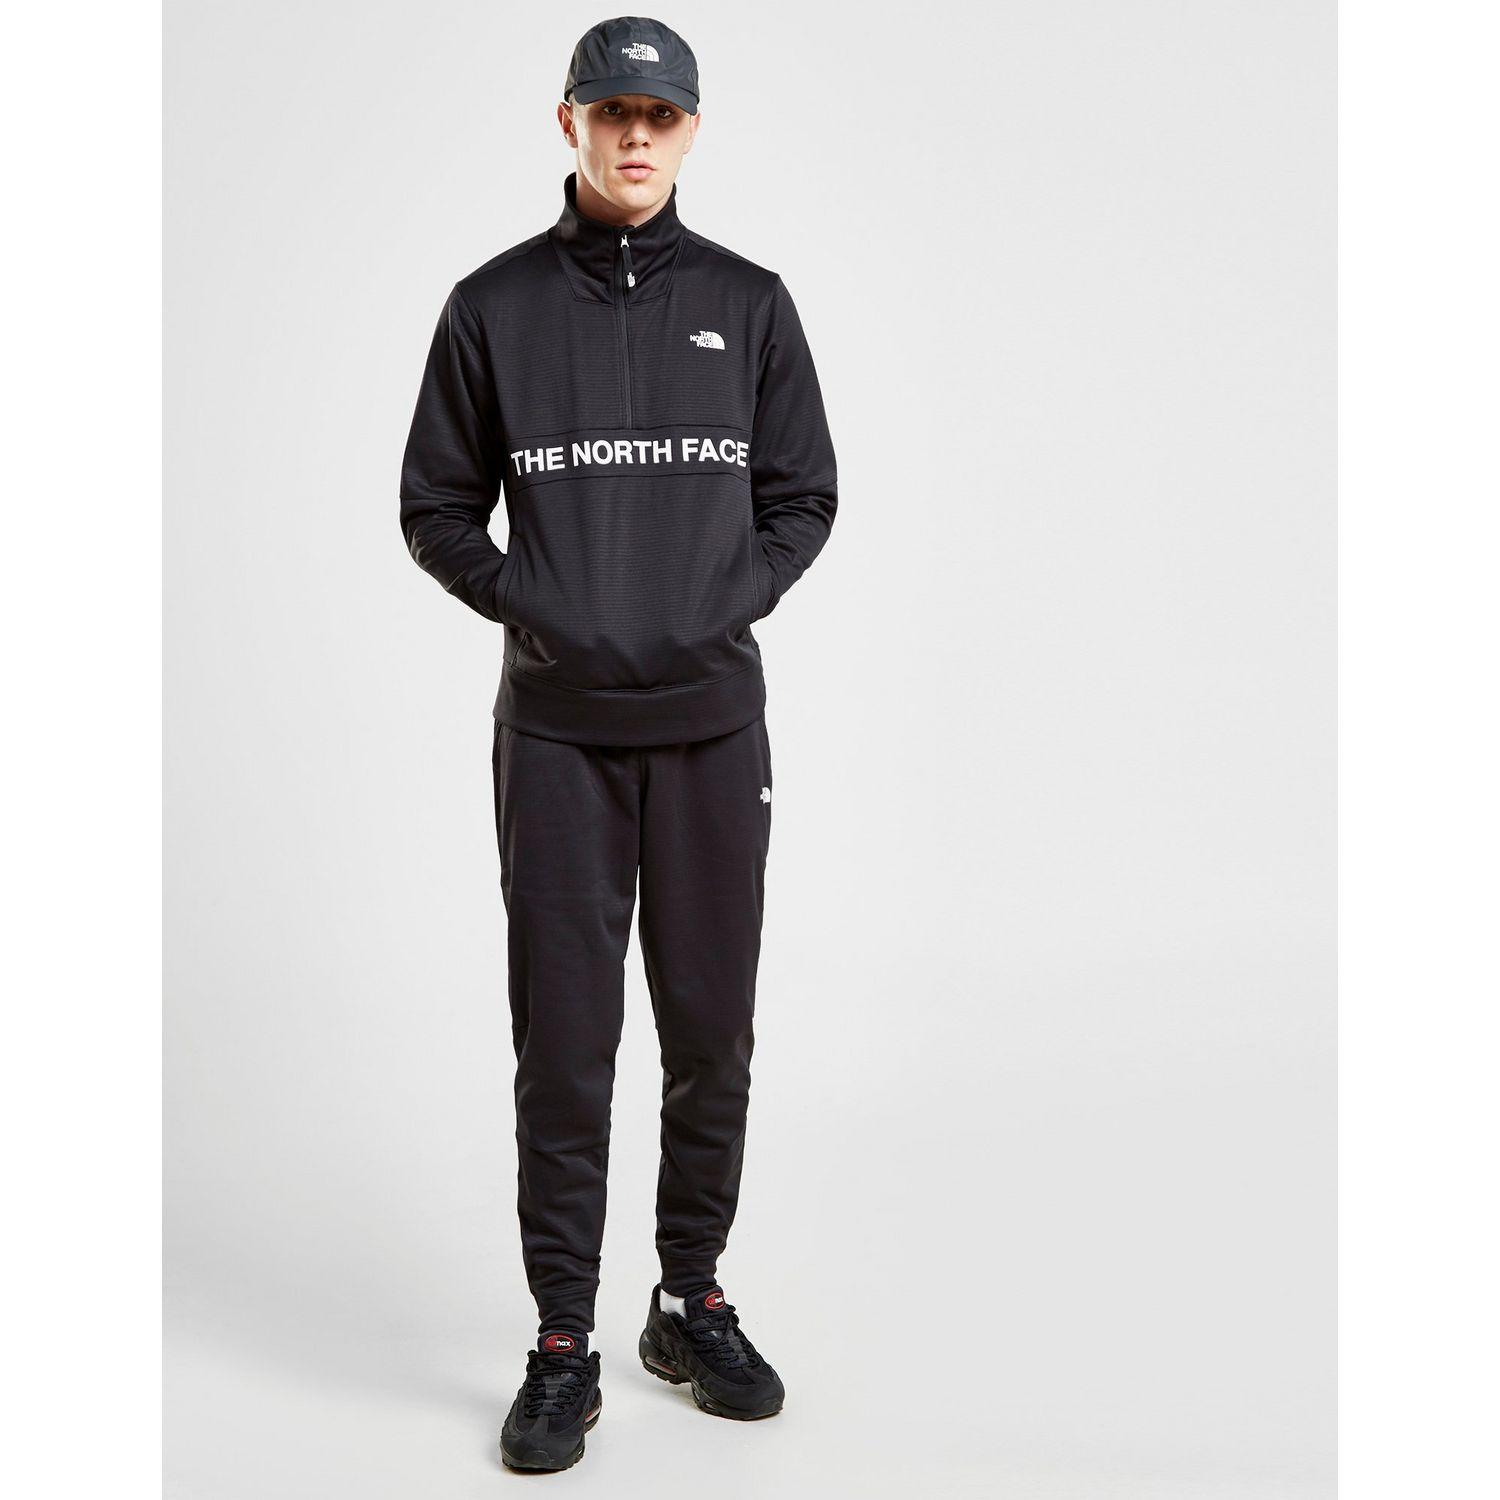 jd sports north face tracksuits